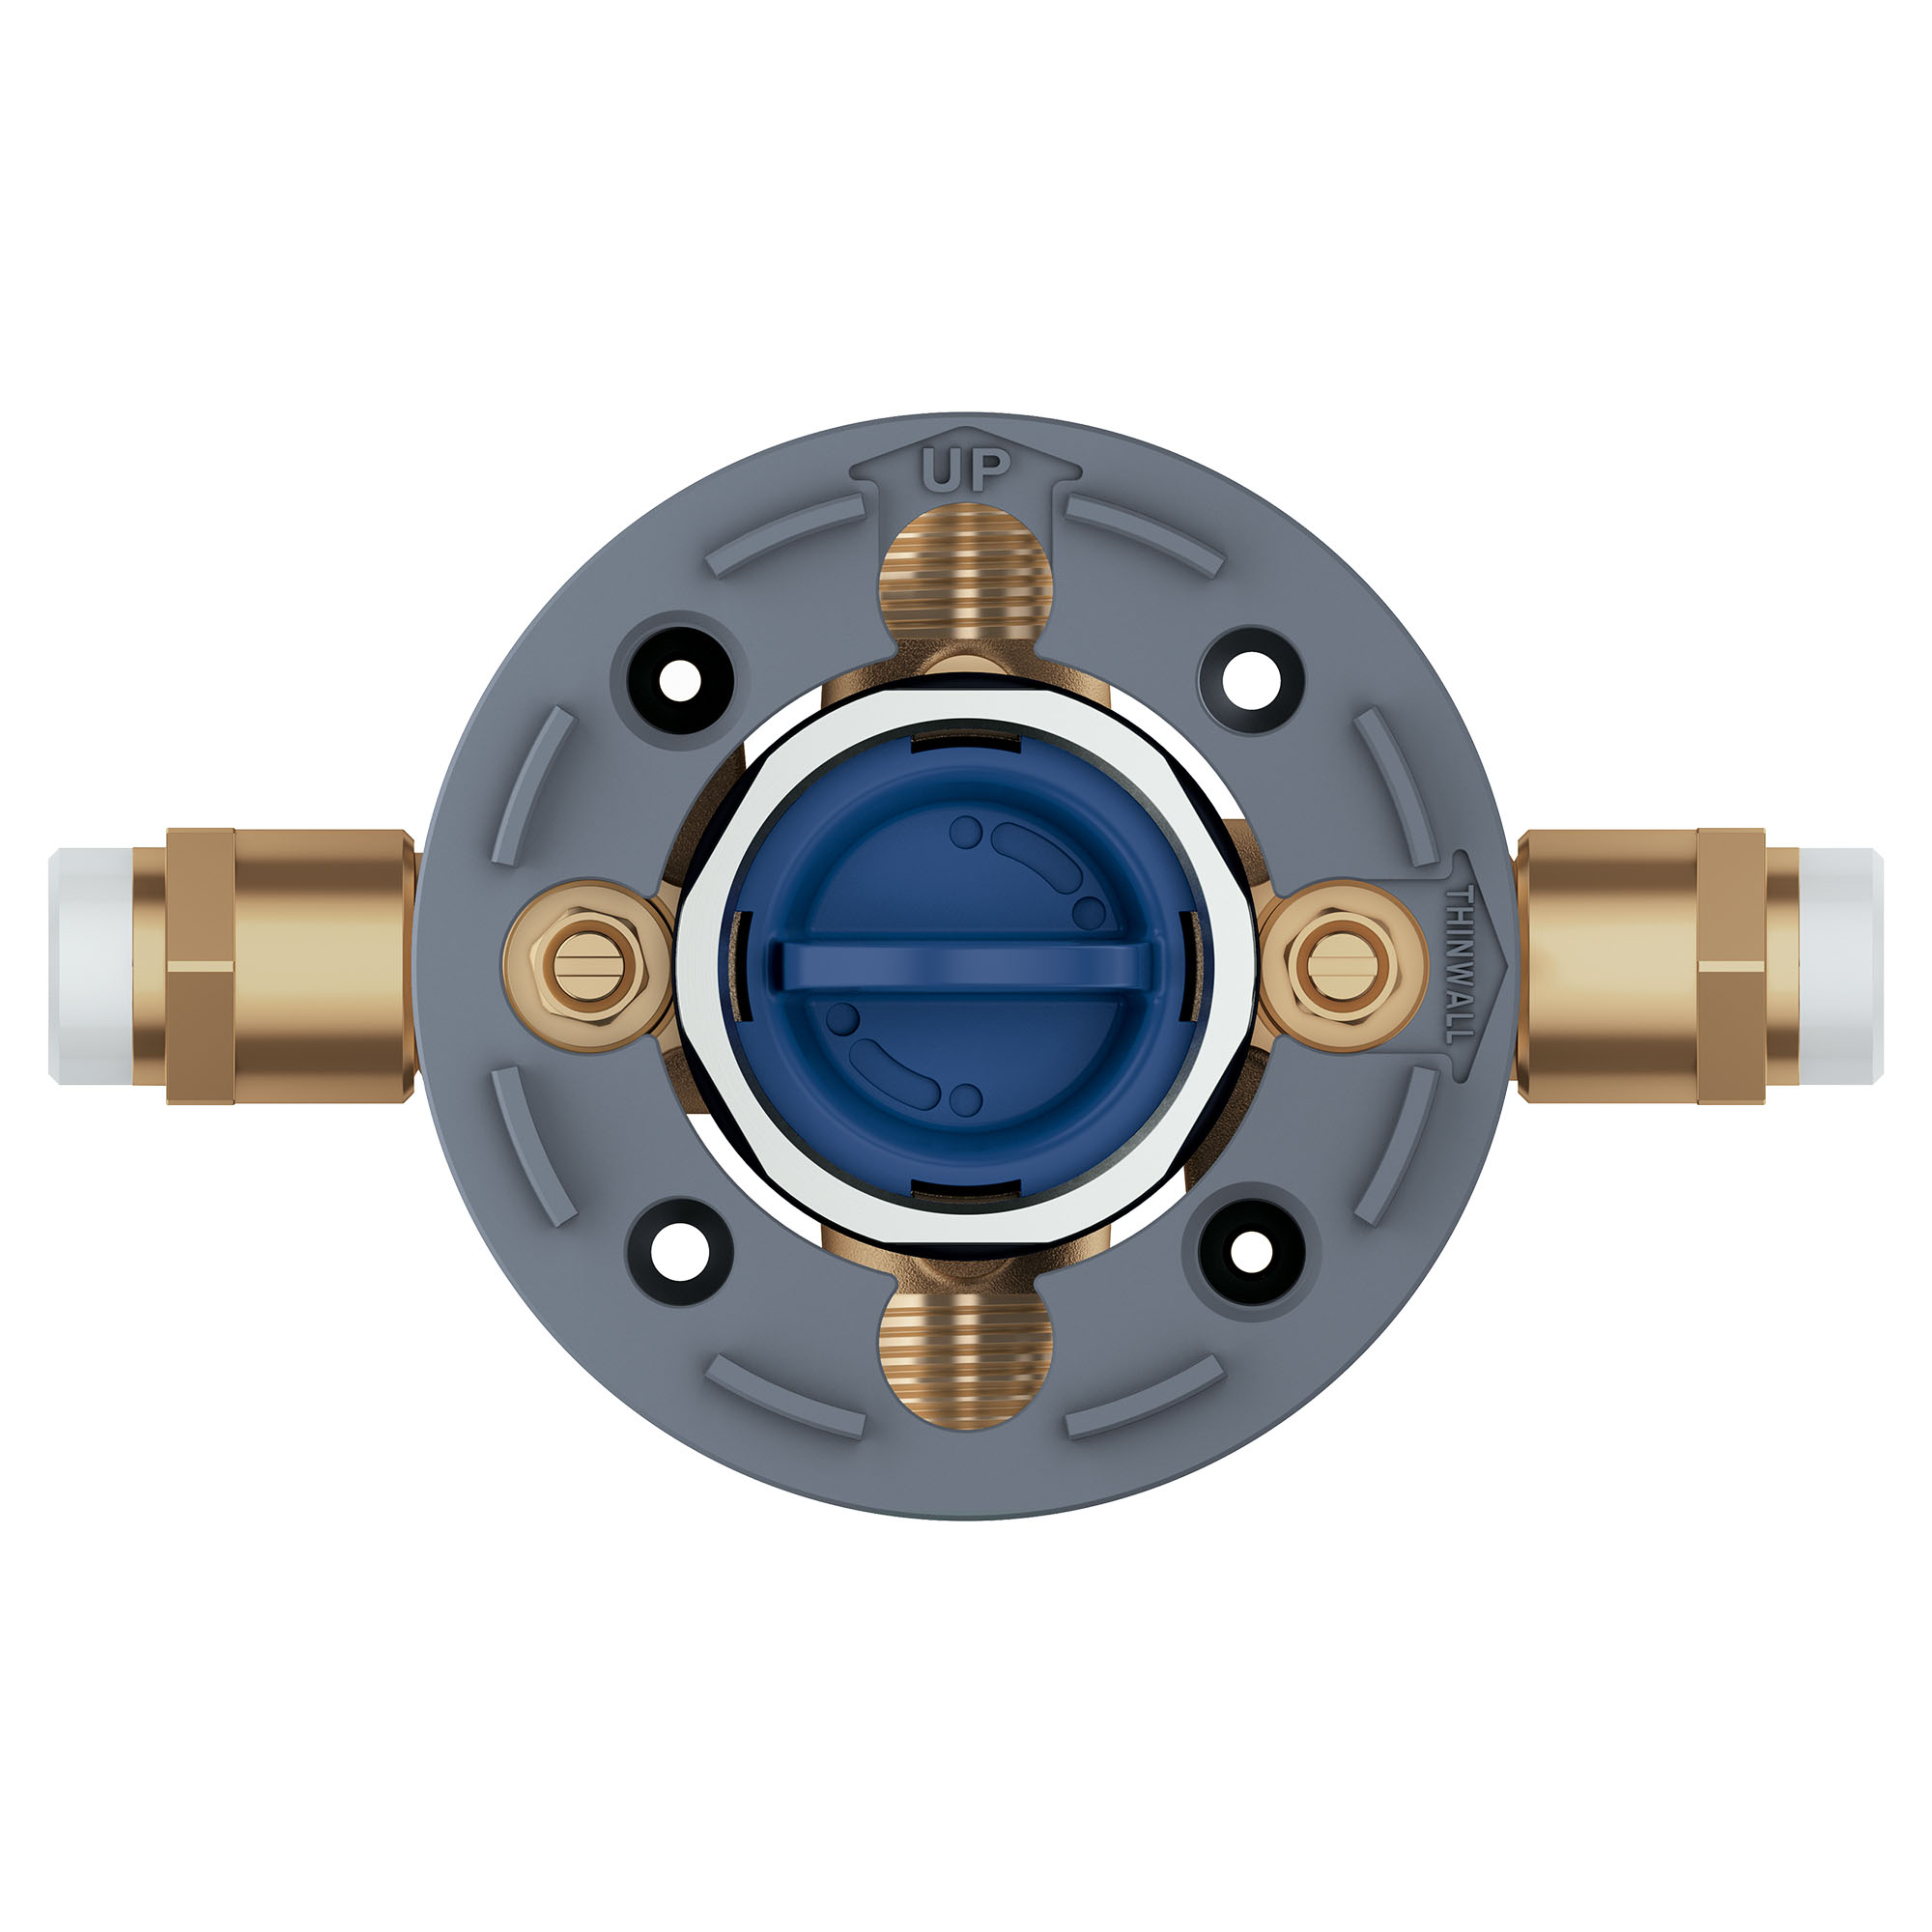 GrohSafe™ 3.0 Pressure Balance Valve Rough with CPVC Outlets